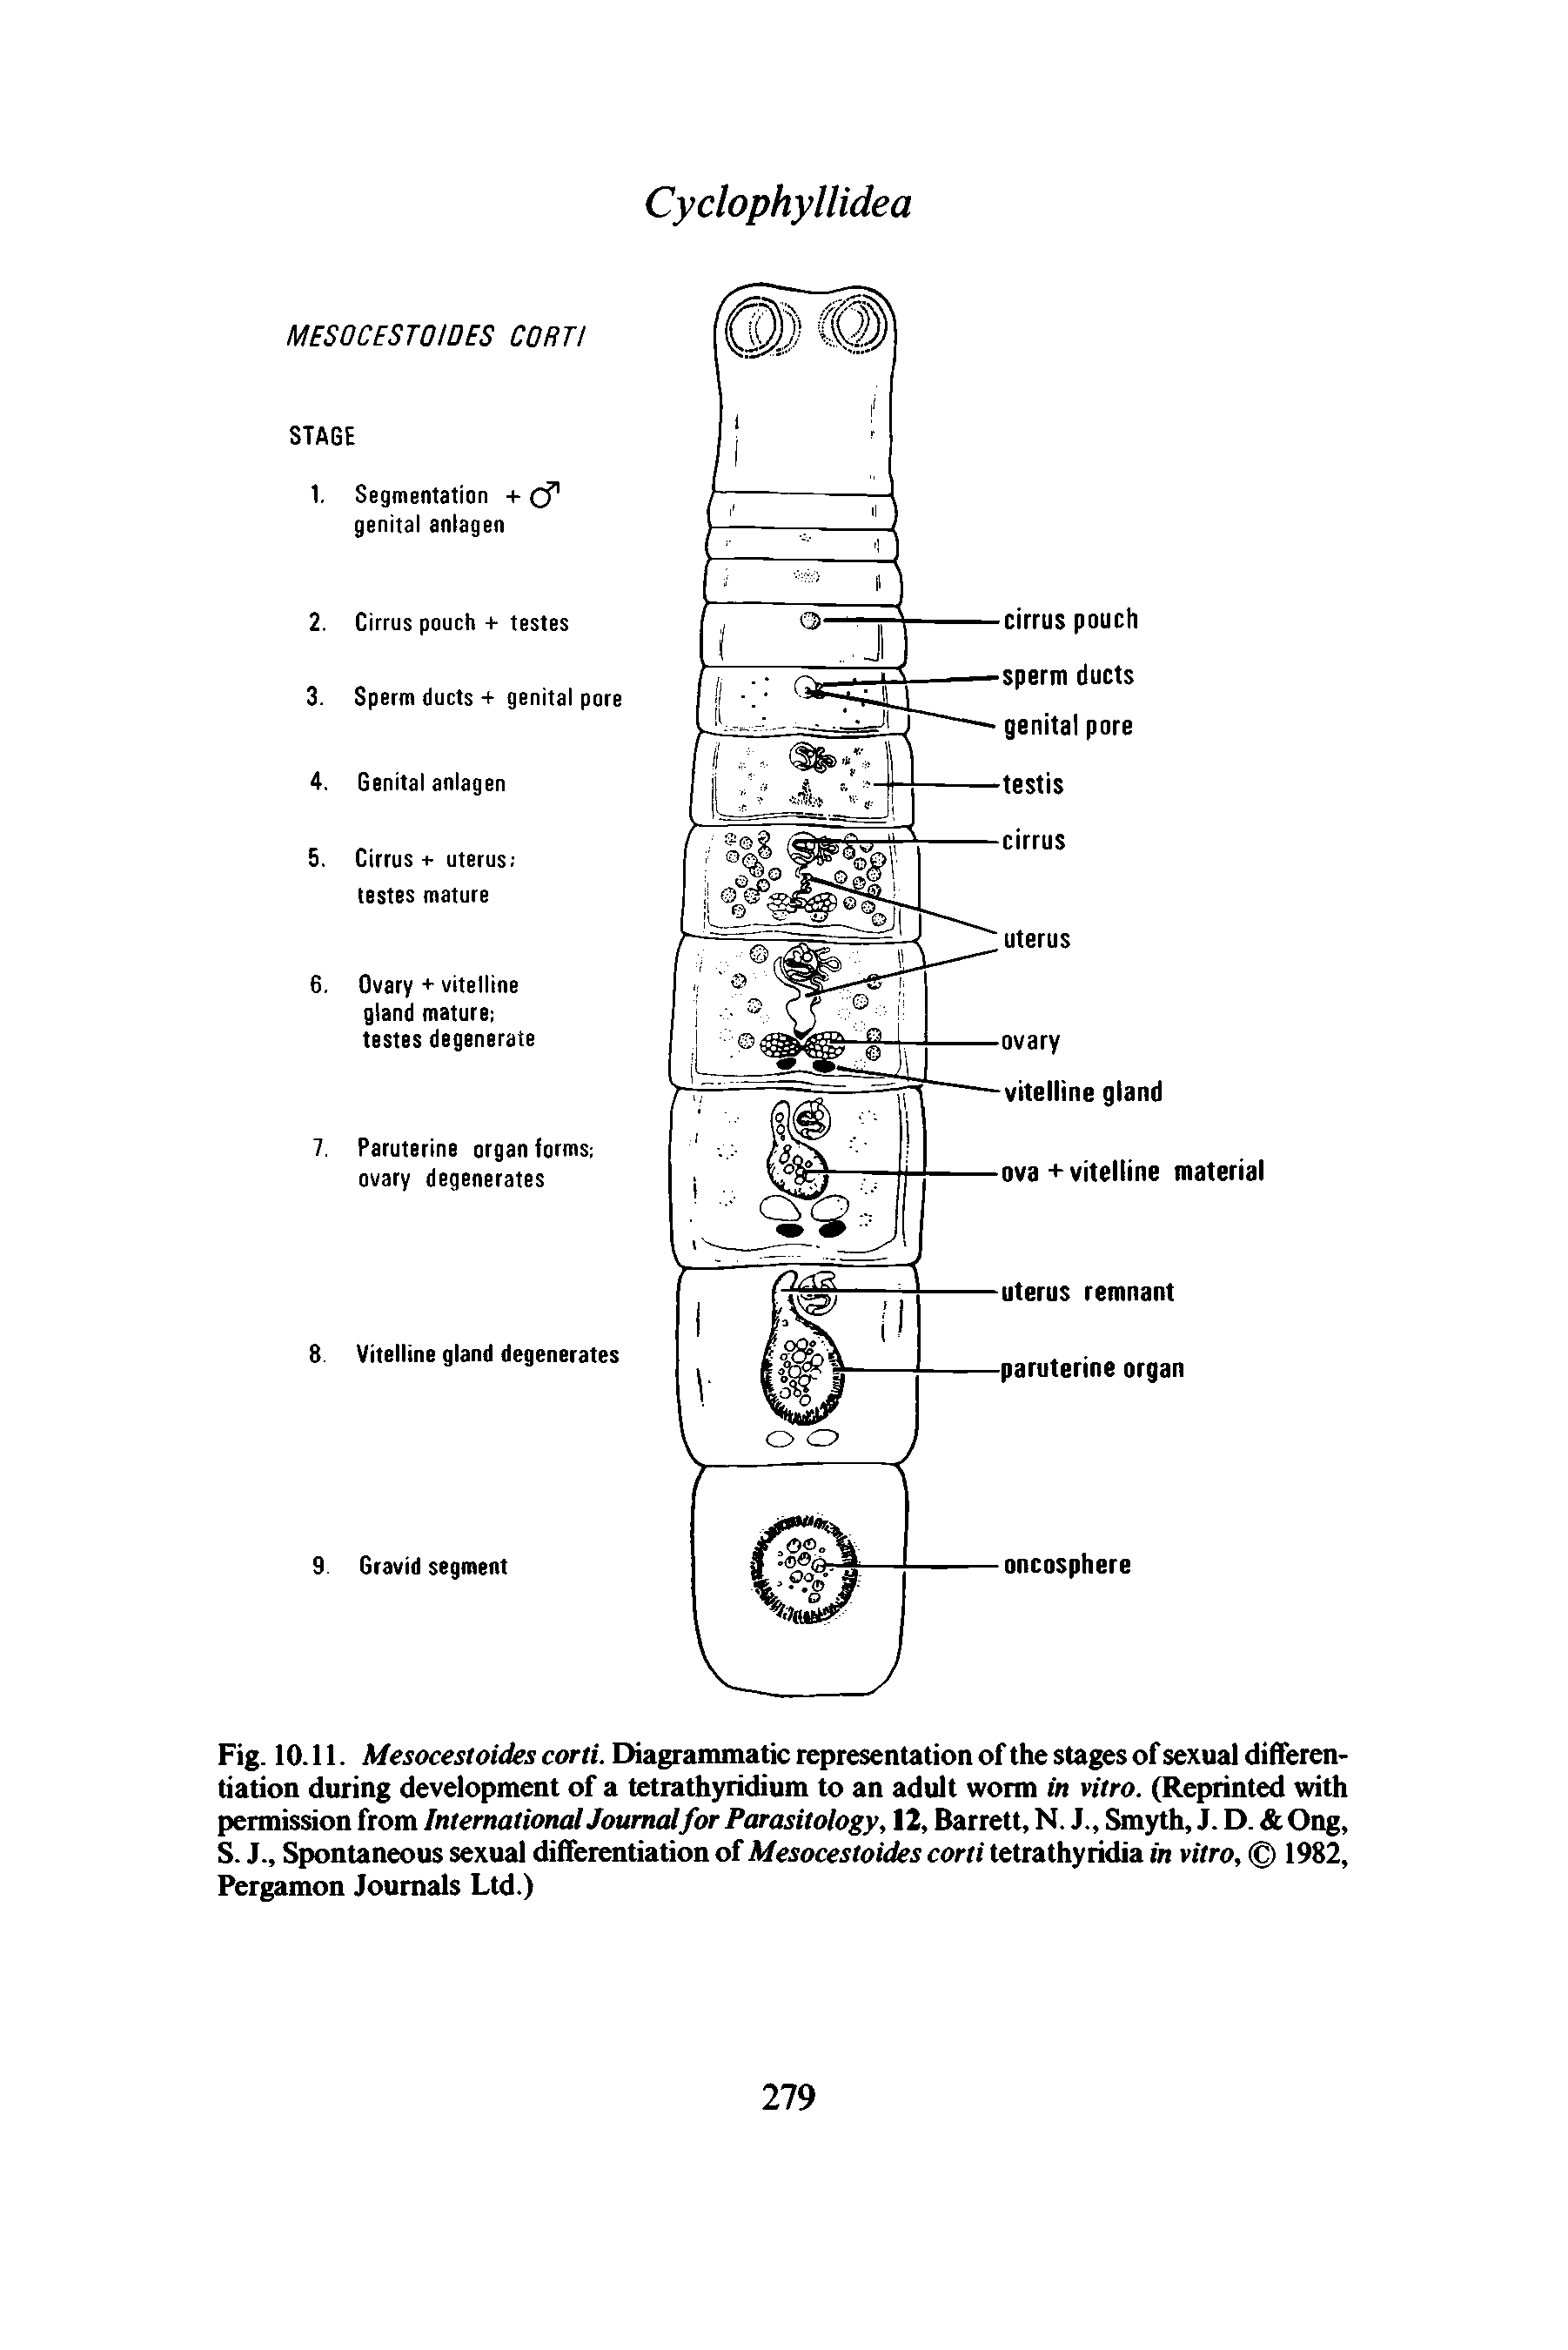 Fig. 10.11. Mesocestoides corti. Diagrammatic representation of the stages of sexual differentiation during development of a tetrathyridium to an adult worm in vitro. (Reprinted with permission from International Journalfor Parasitology, 12, Barrett, N. J., Smyth, J. D. Ong, S. J., Spontaneous sexual differentiation of Mesocestoides corti tetrathyridia in vitro, 1982, Pergamon Journals Ltd.)...